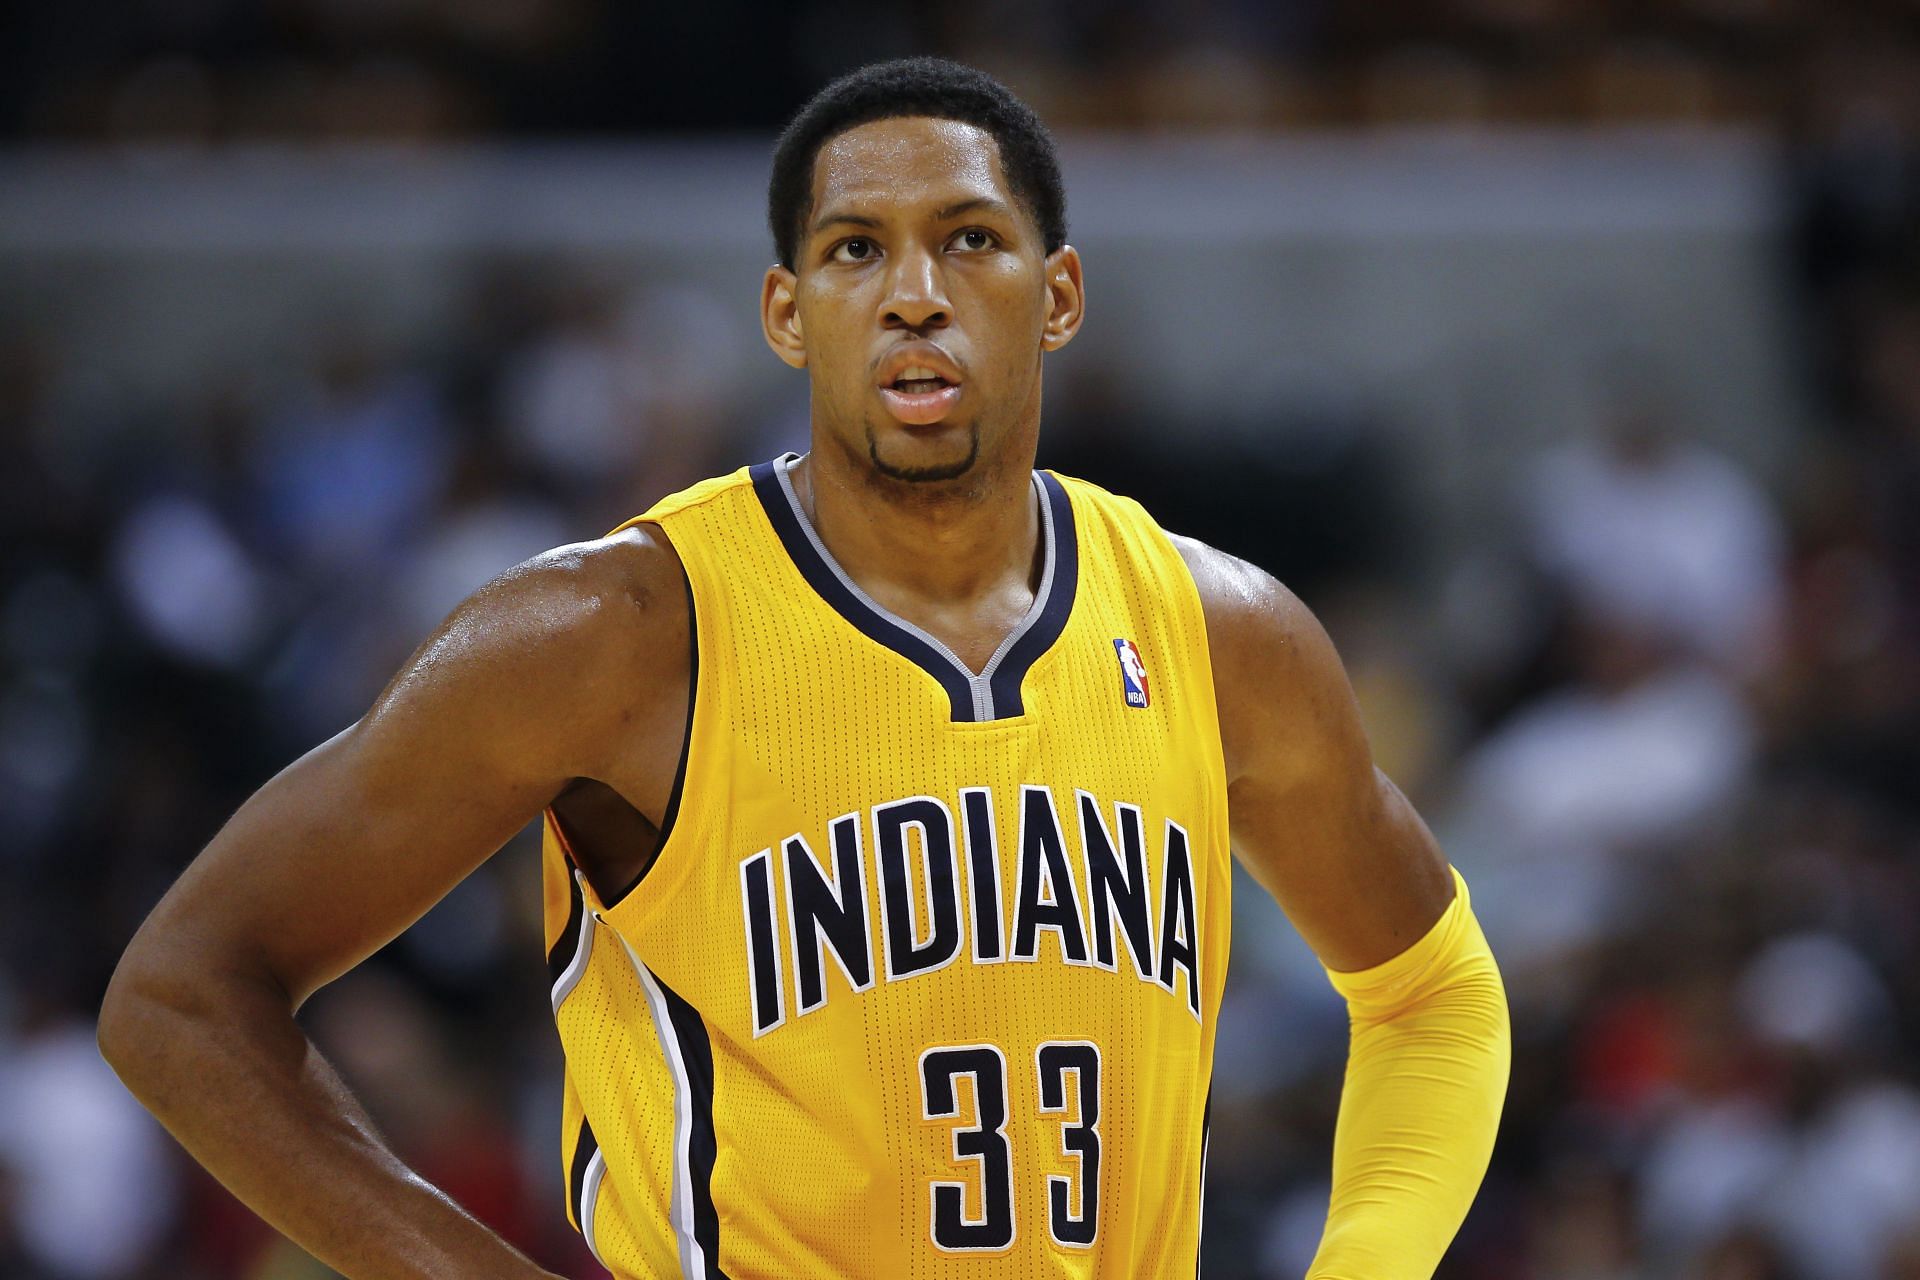 Danny Granger may have hooked up with Brittany Schmitt in the past (Image via Getty Images)